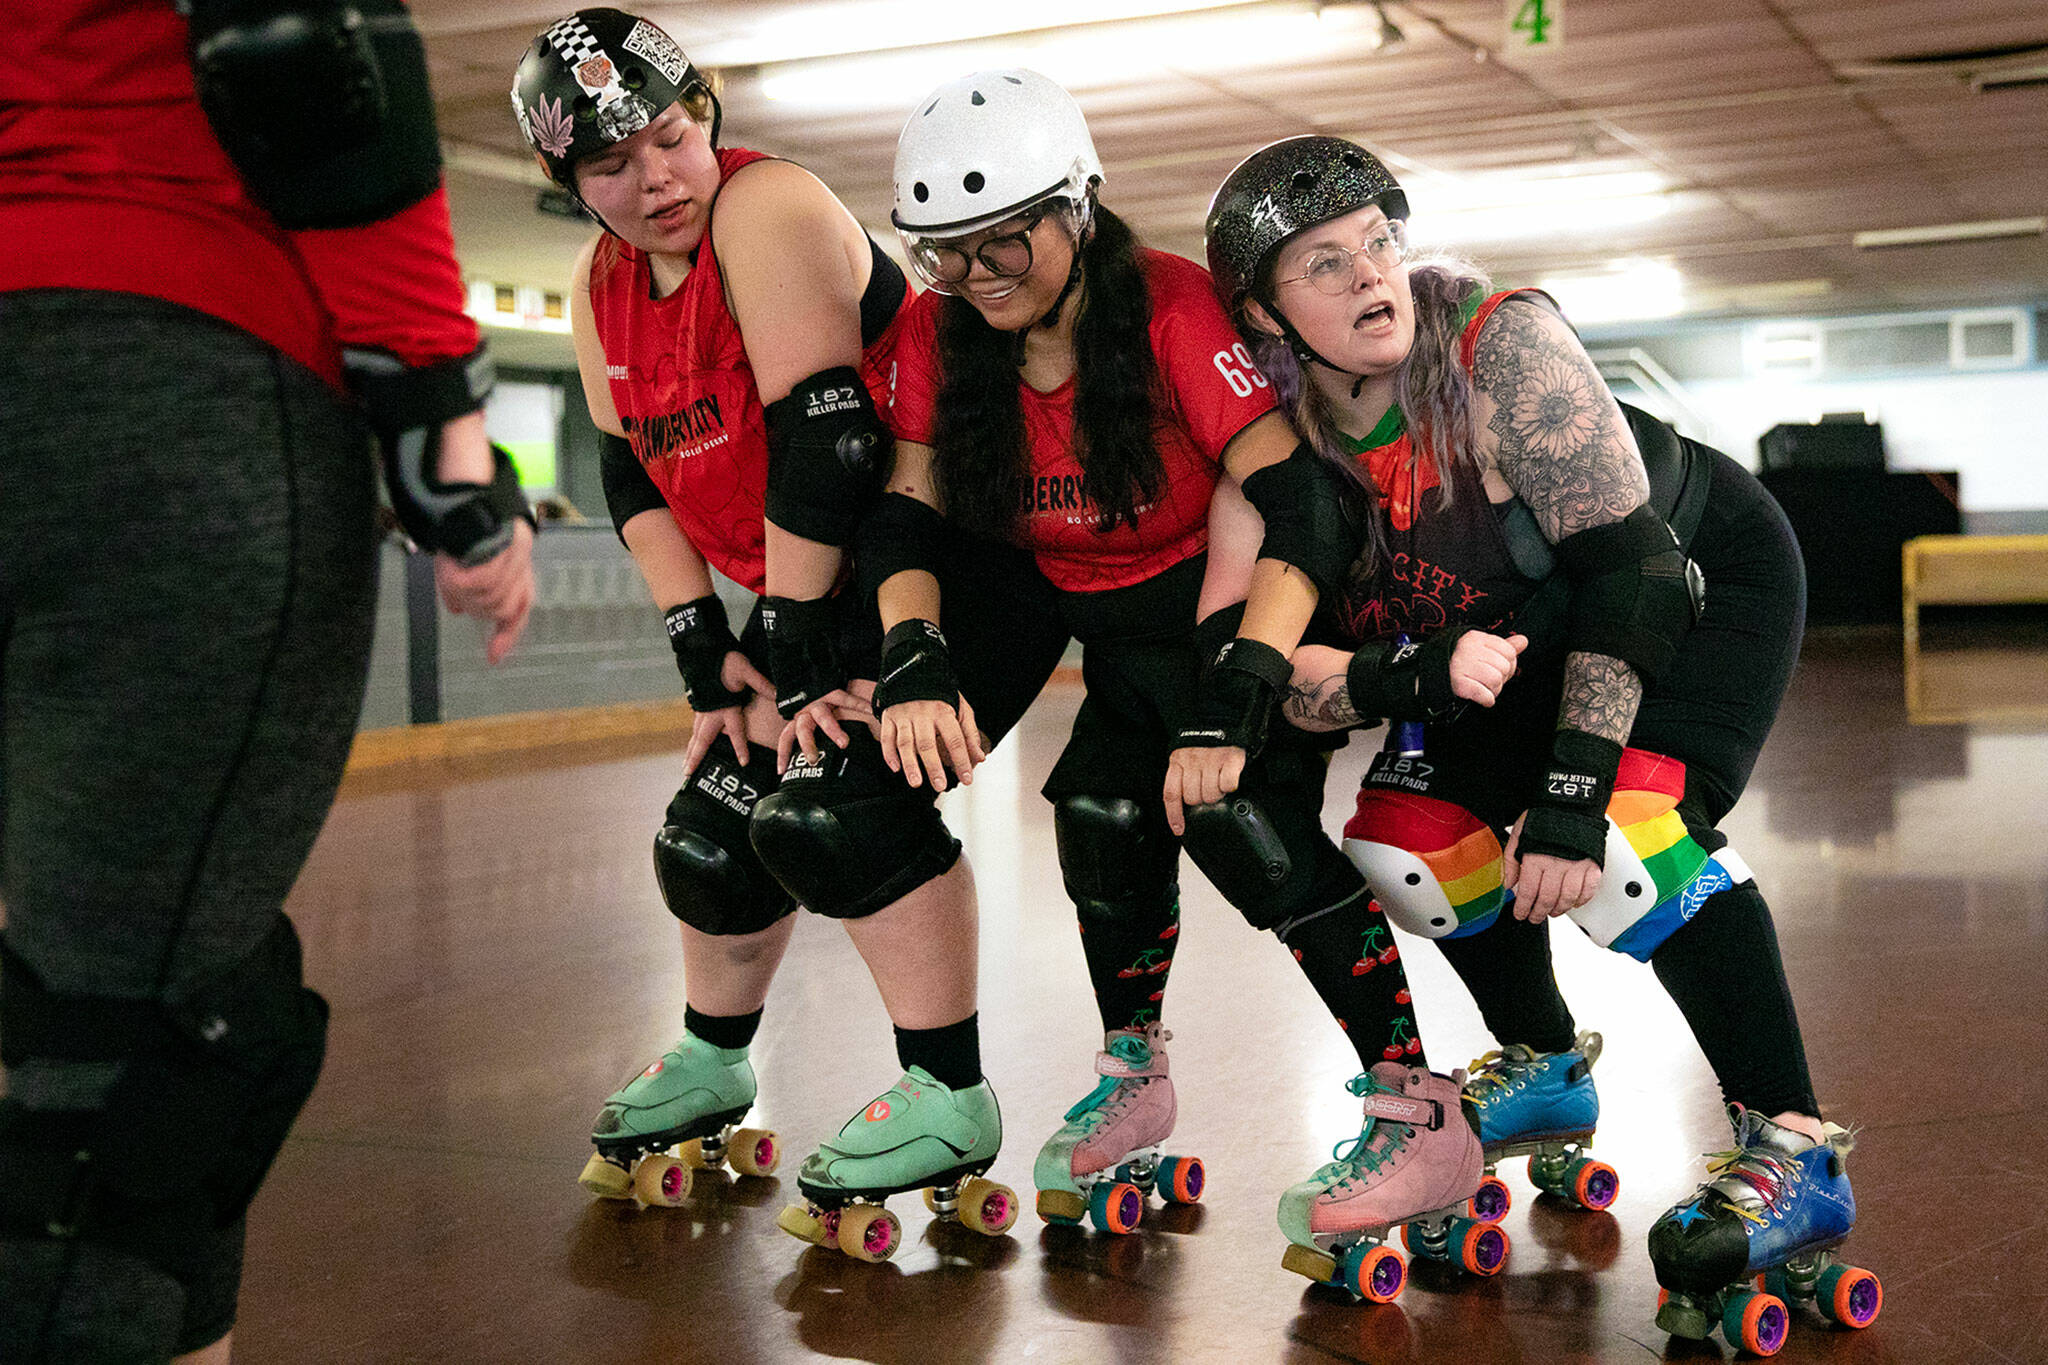 Calling all 'straw-babies': Marysville roller derby outgrows its